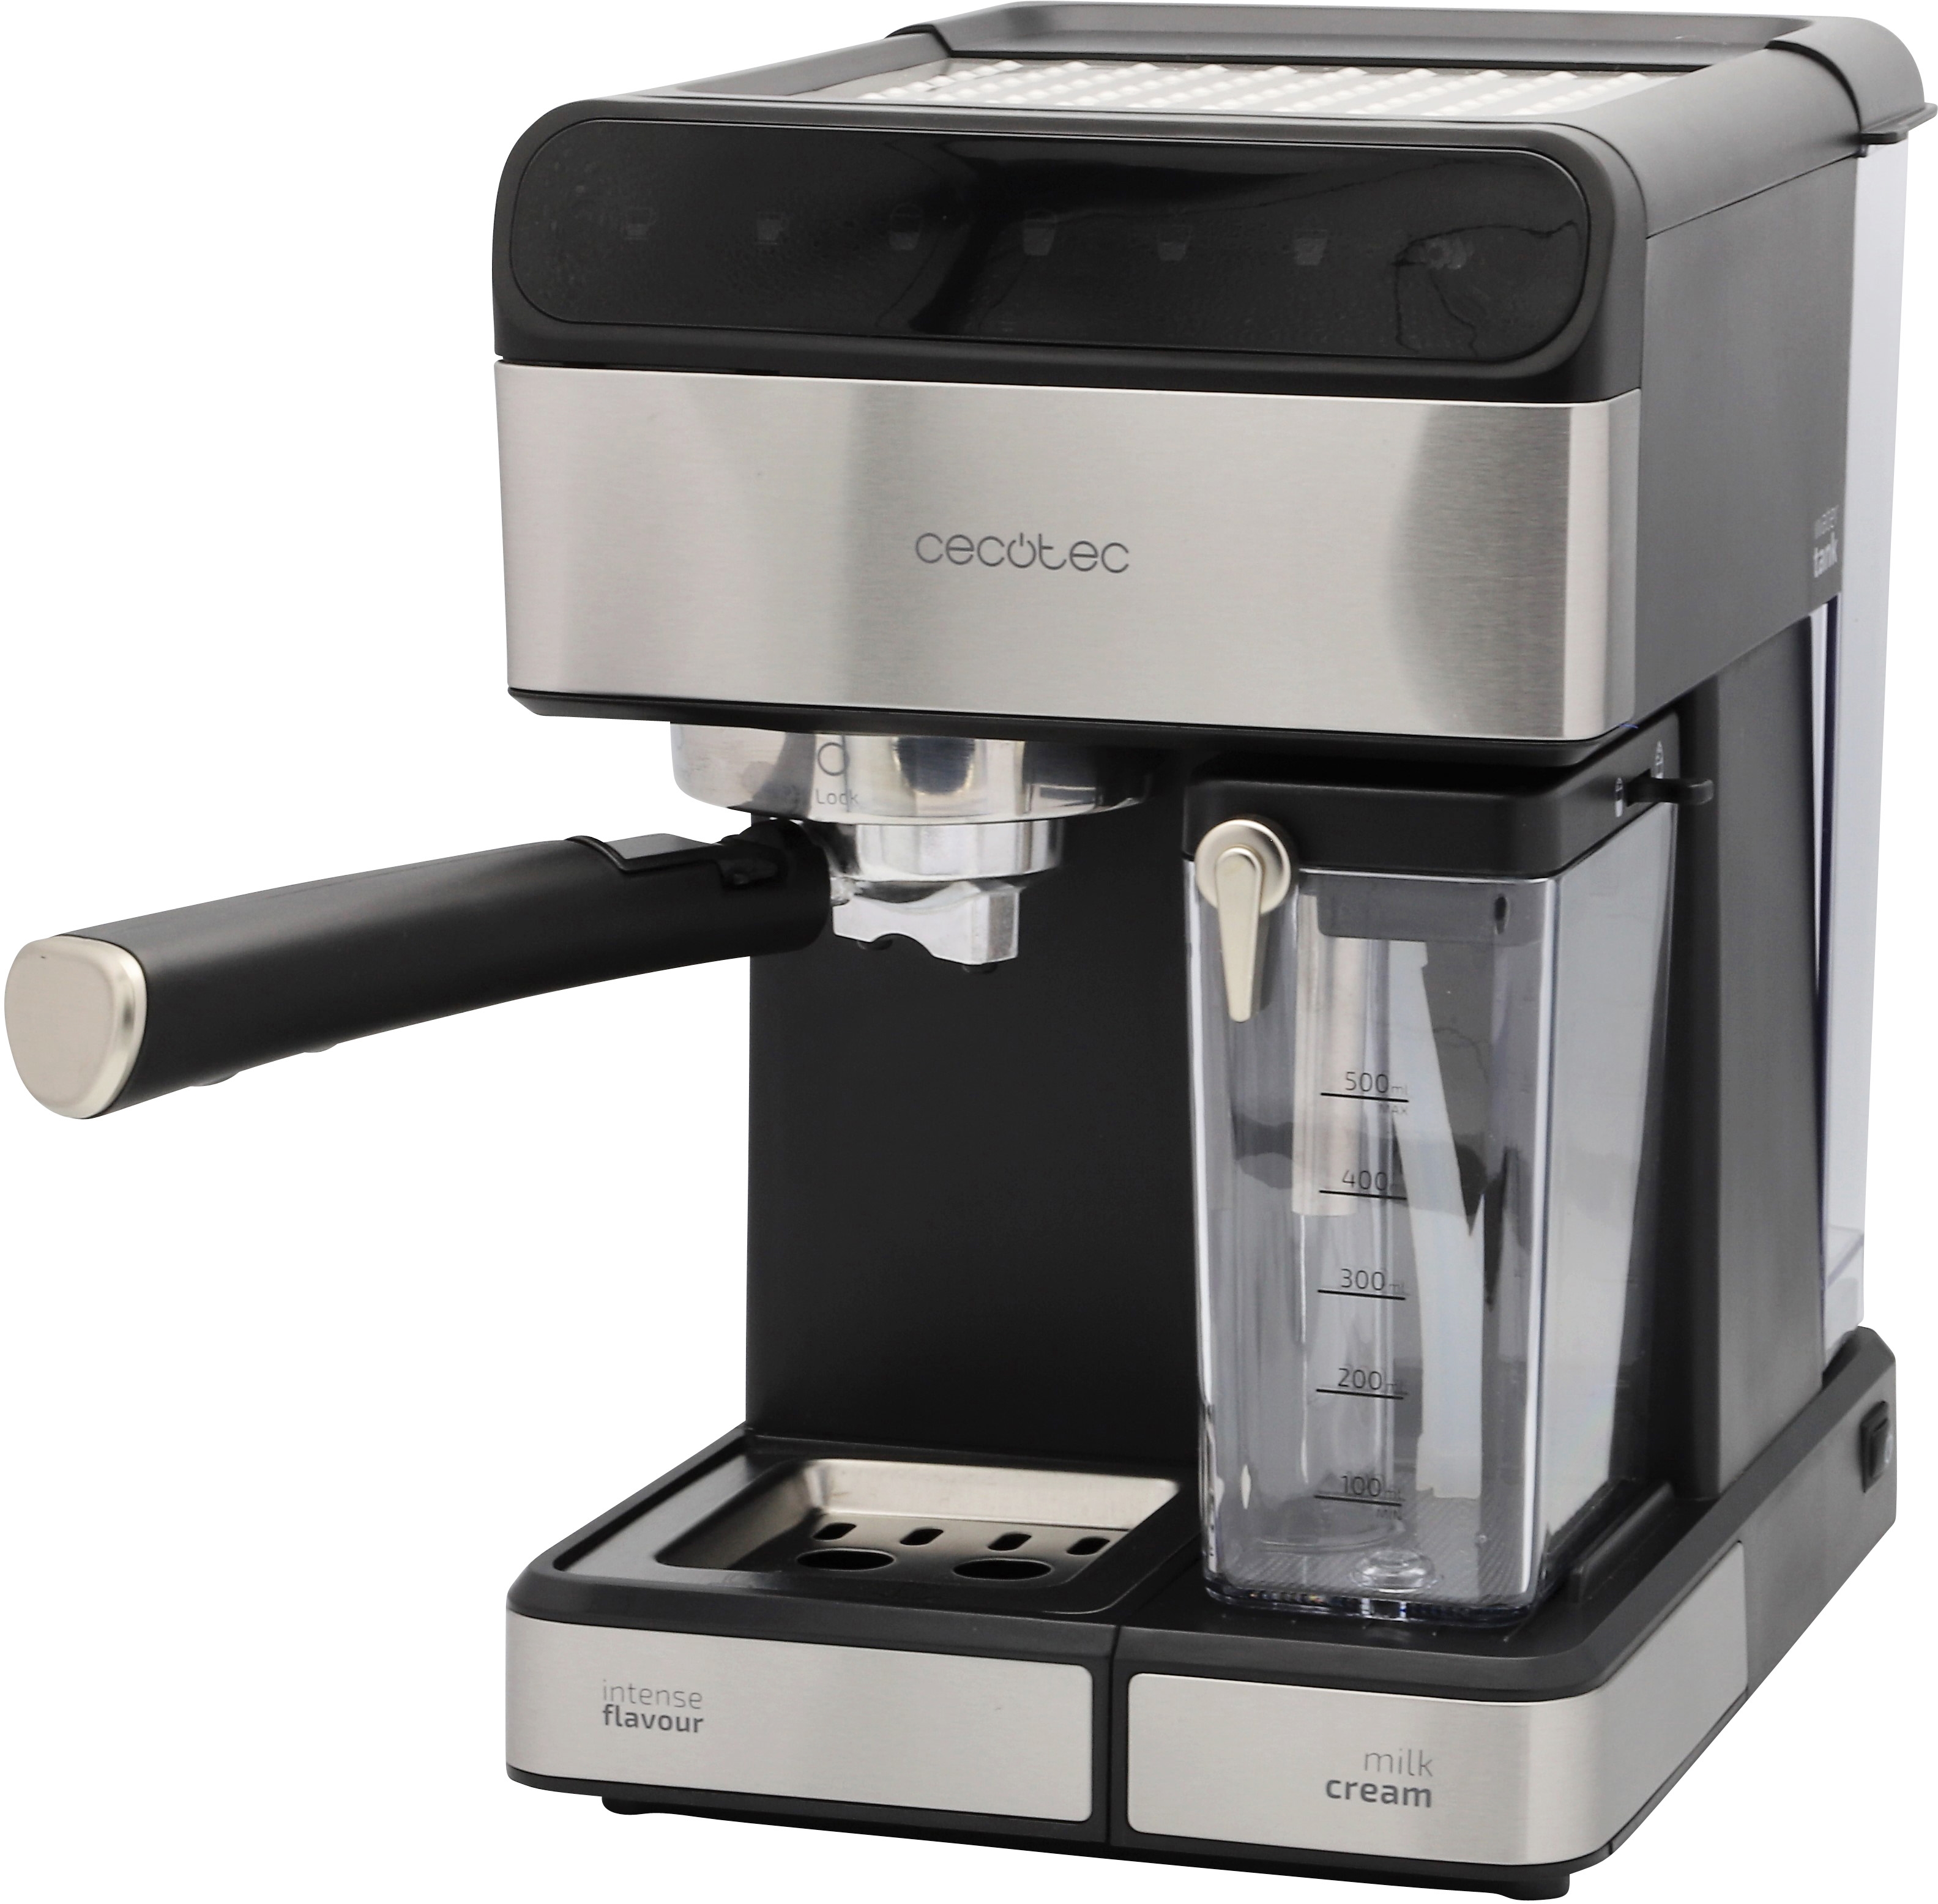 Cafetera Cecotec Power Instant Ccino 20 Touch Opiniones